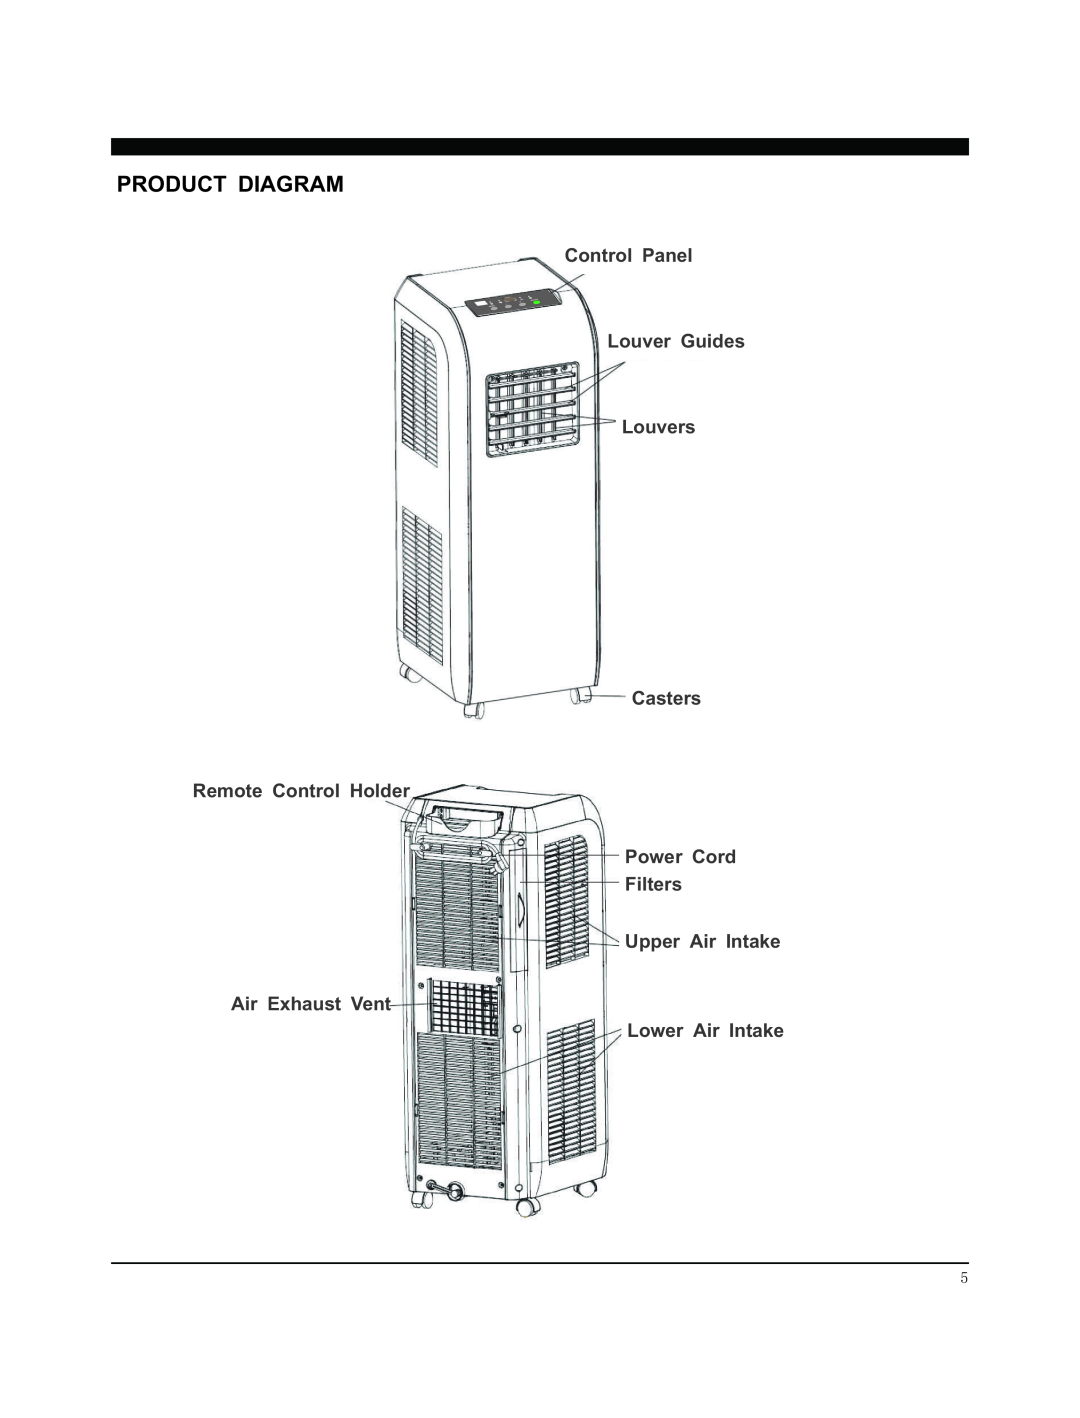 Soleus Air GM-PAC-08E3 Product Diagram, Control Panel Louver Guides Louvers Casters, Upper Air Intake Air Exhaust Vent 